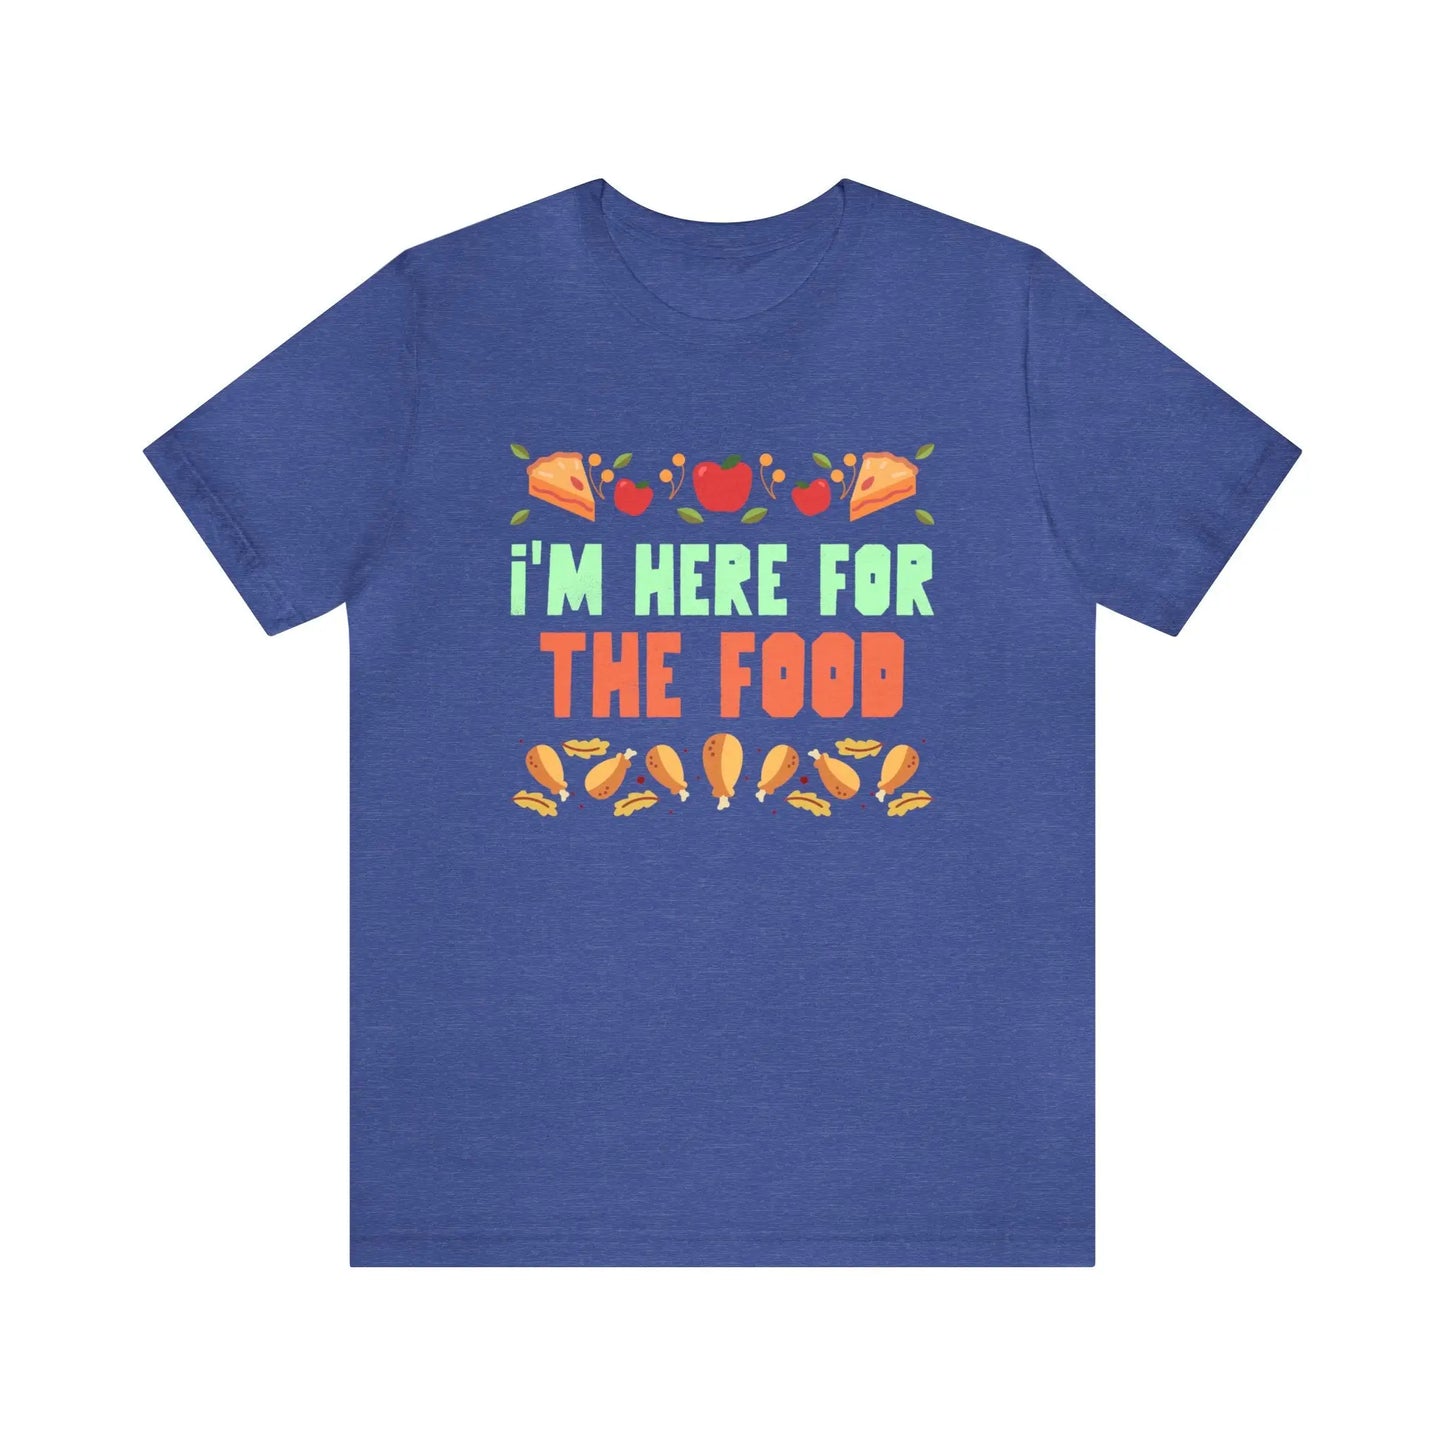 I'm Here For The Food Men's Short Sleeve Tee - Wicked Tees